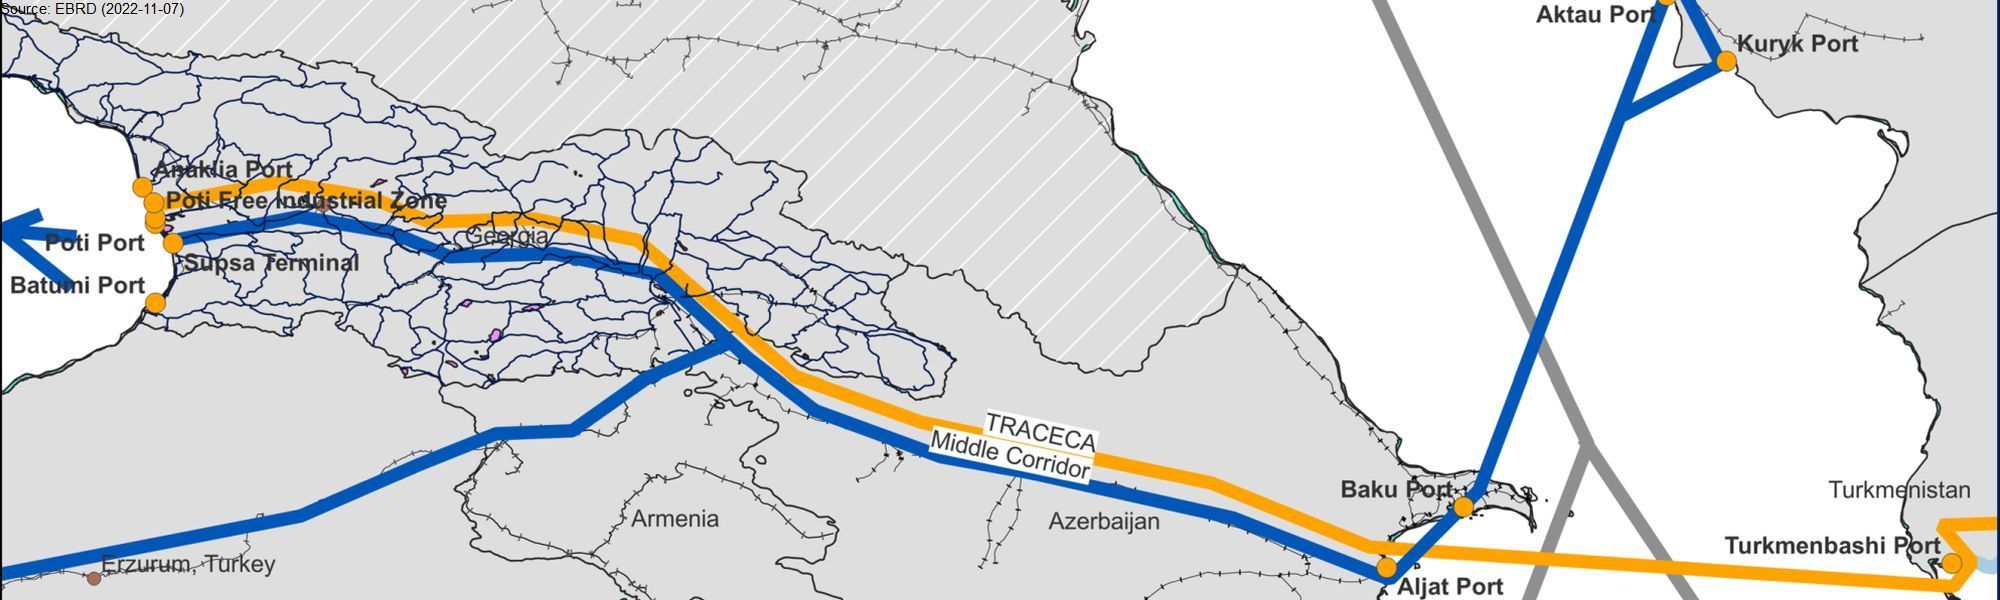 Pre-Feasibility Study for a New Cargo Hub along the International Middle Corridor